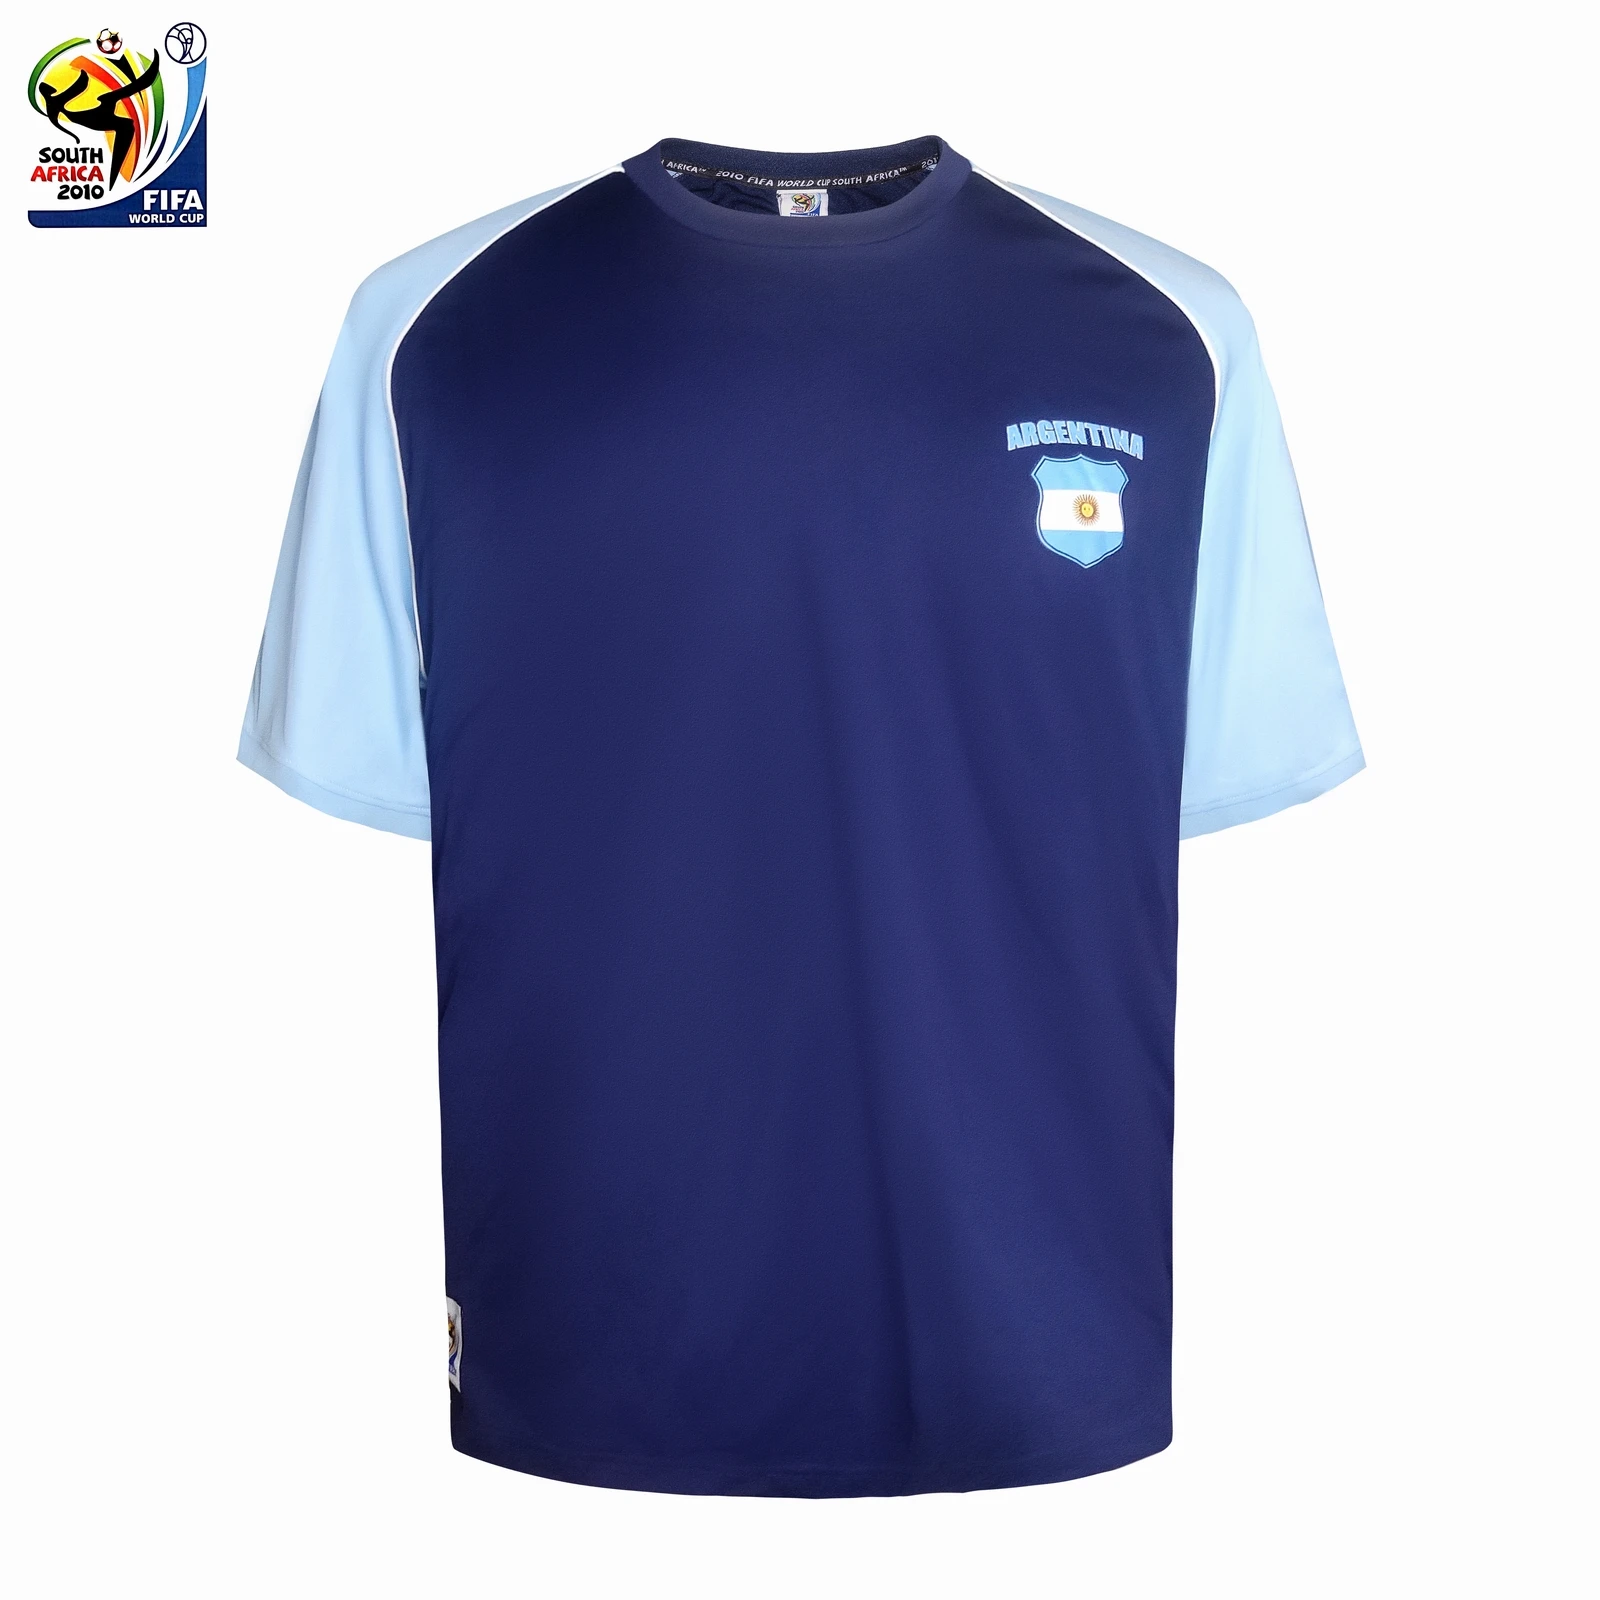 

2010 South Africa World Cup Argentina away team jersey fan shirt commemorative men's T-shirt polyester imported